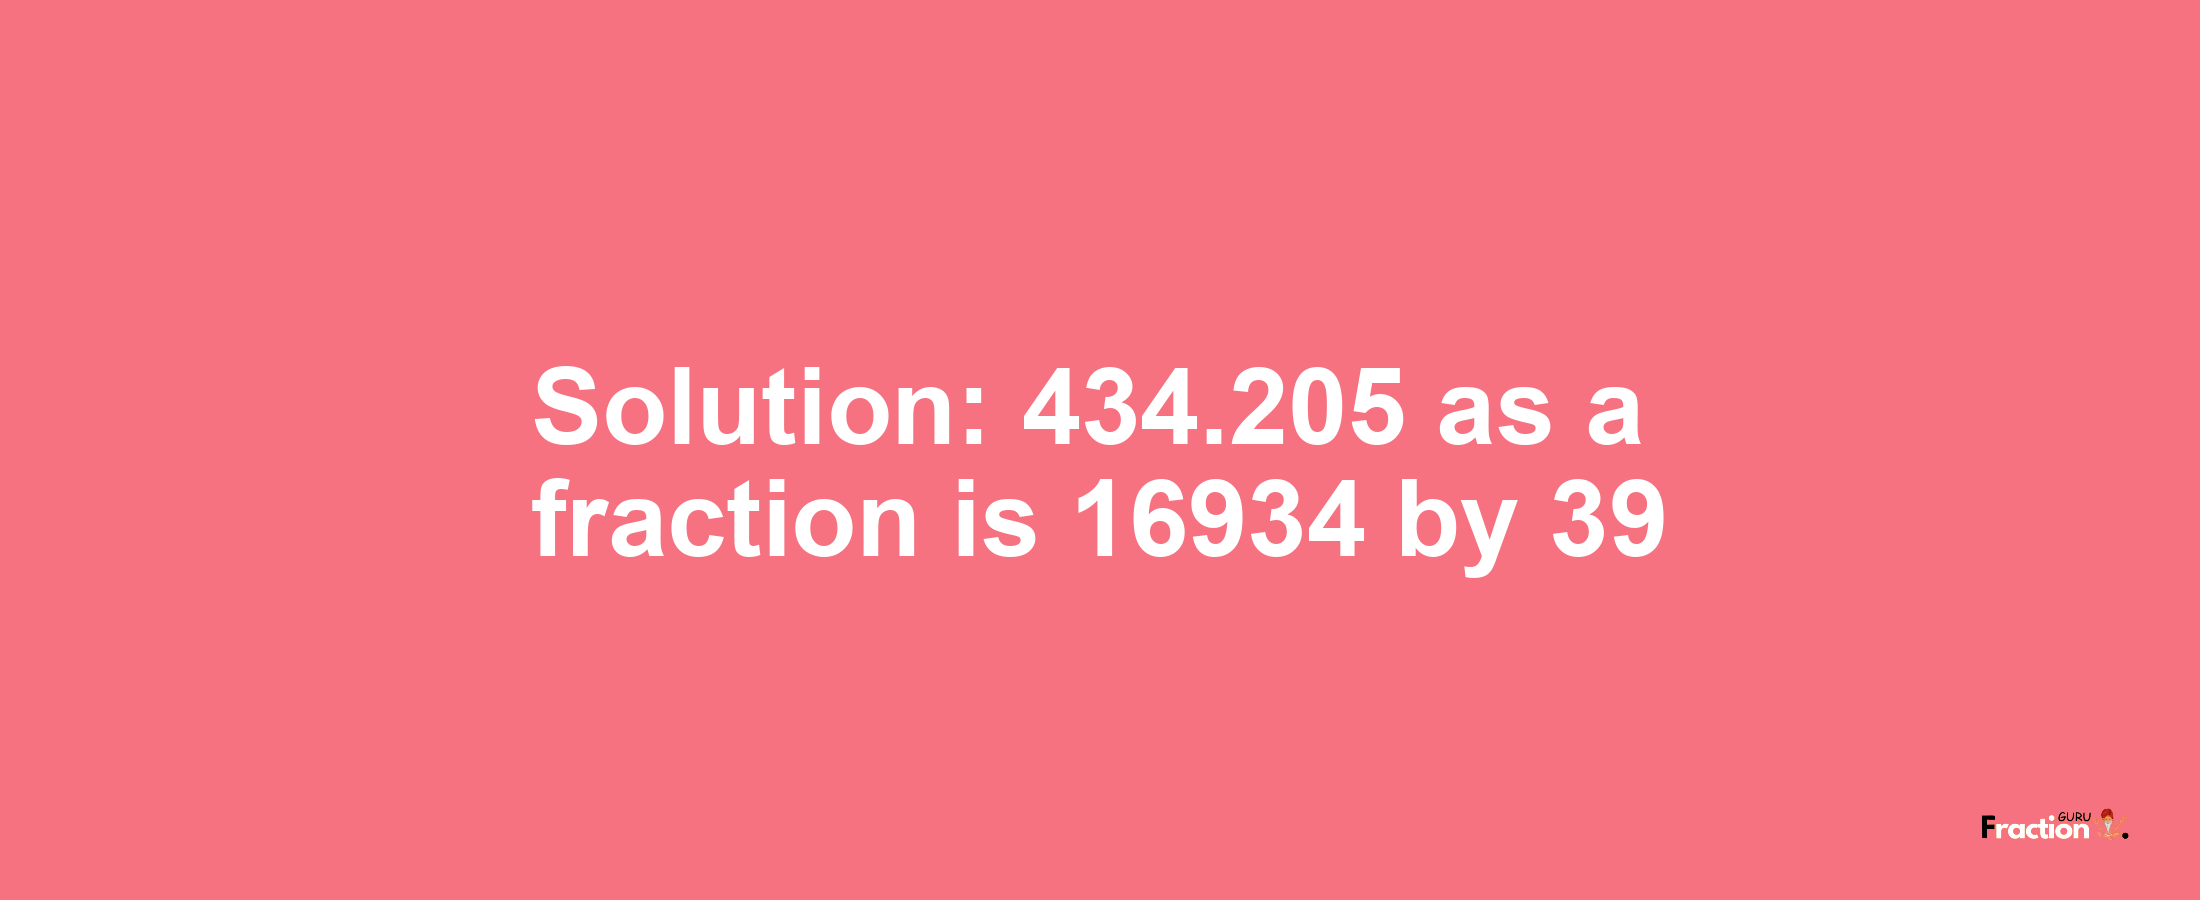 Solution:434.205 as a fraction is 16934/39